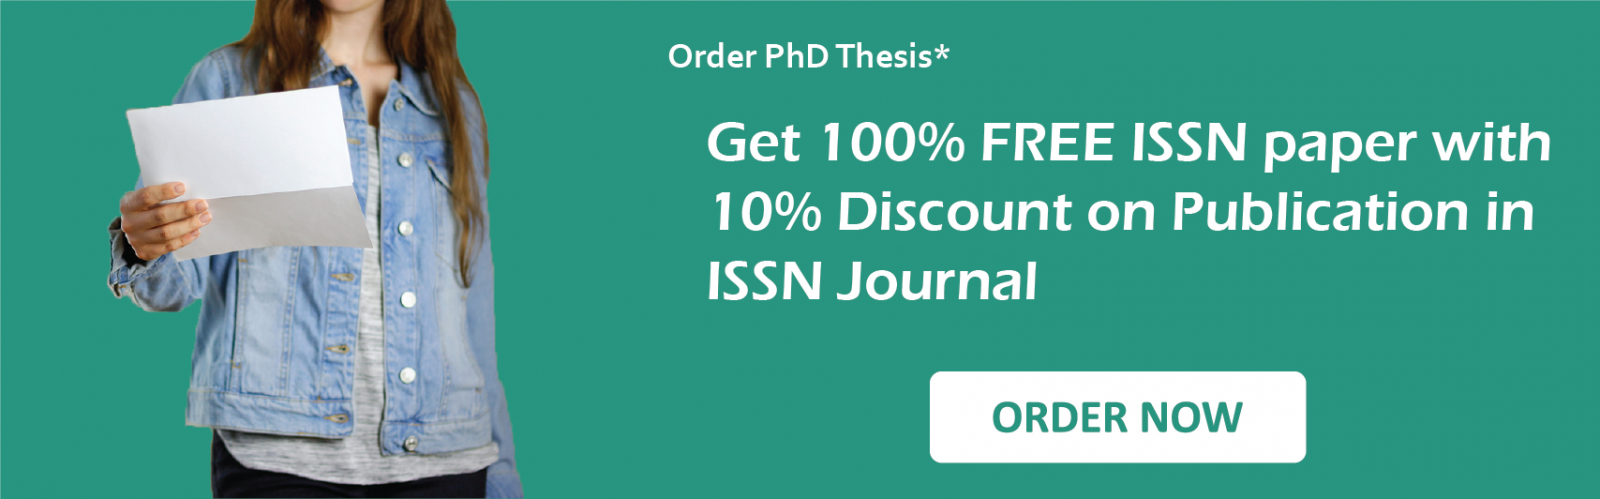 Best Thesis Writing for Phd - Words Doctorate